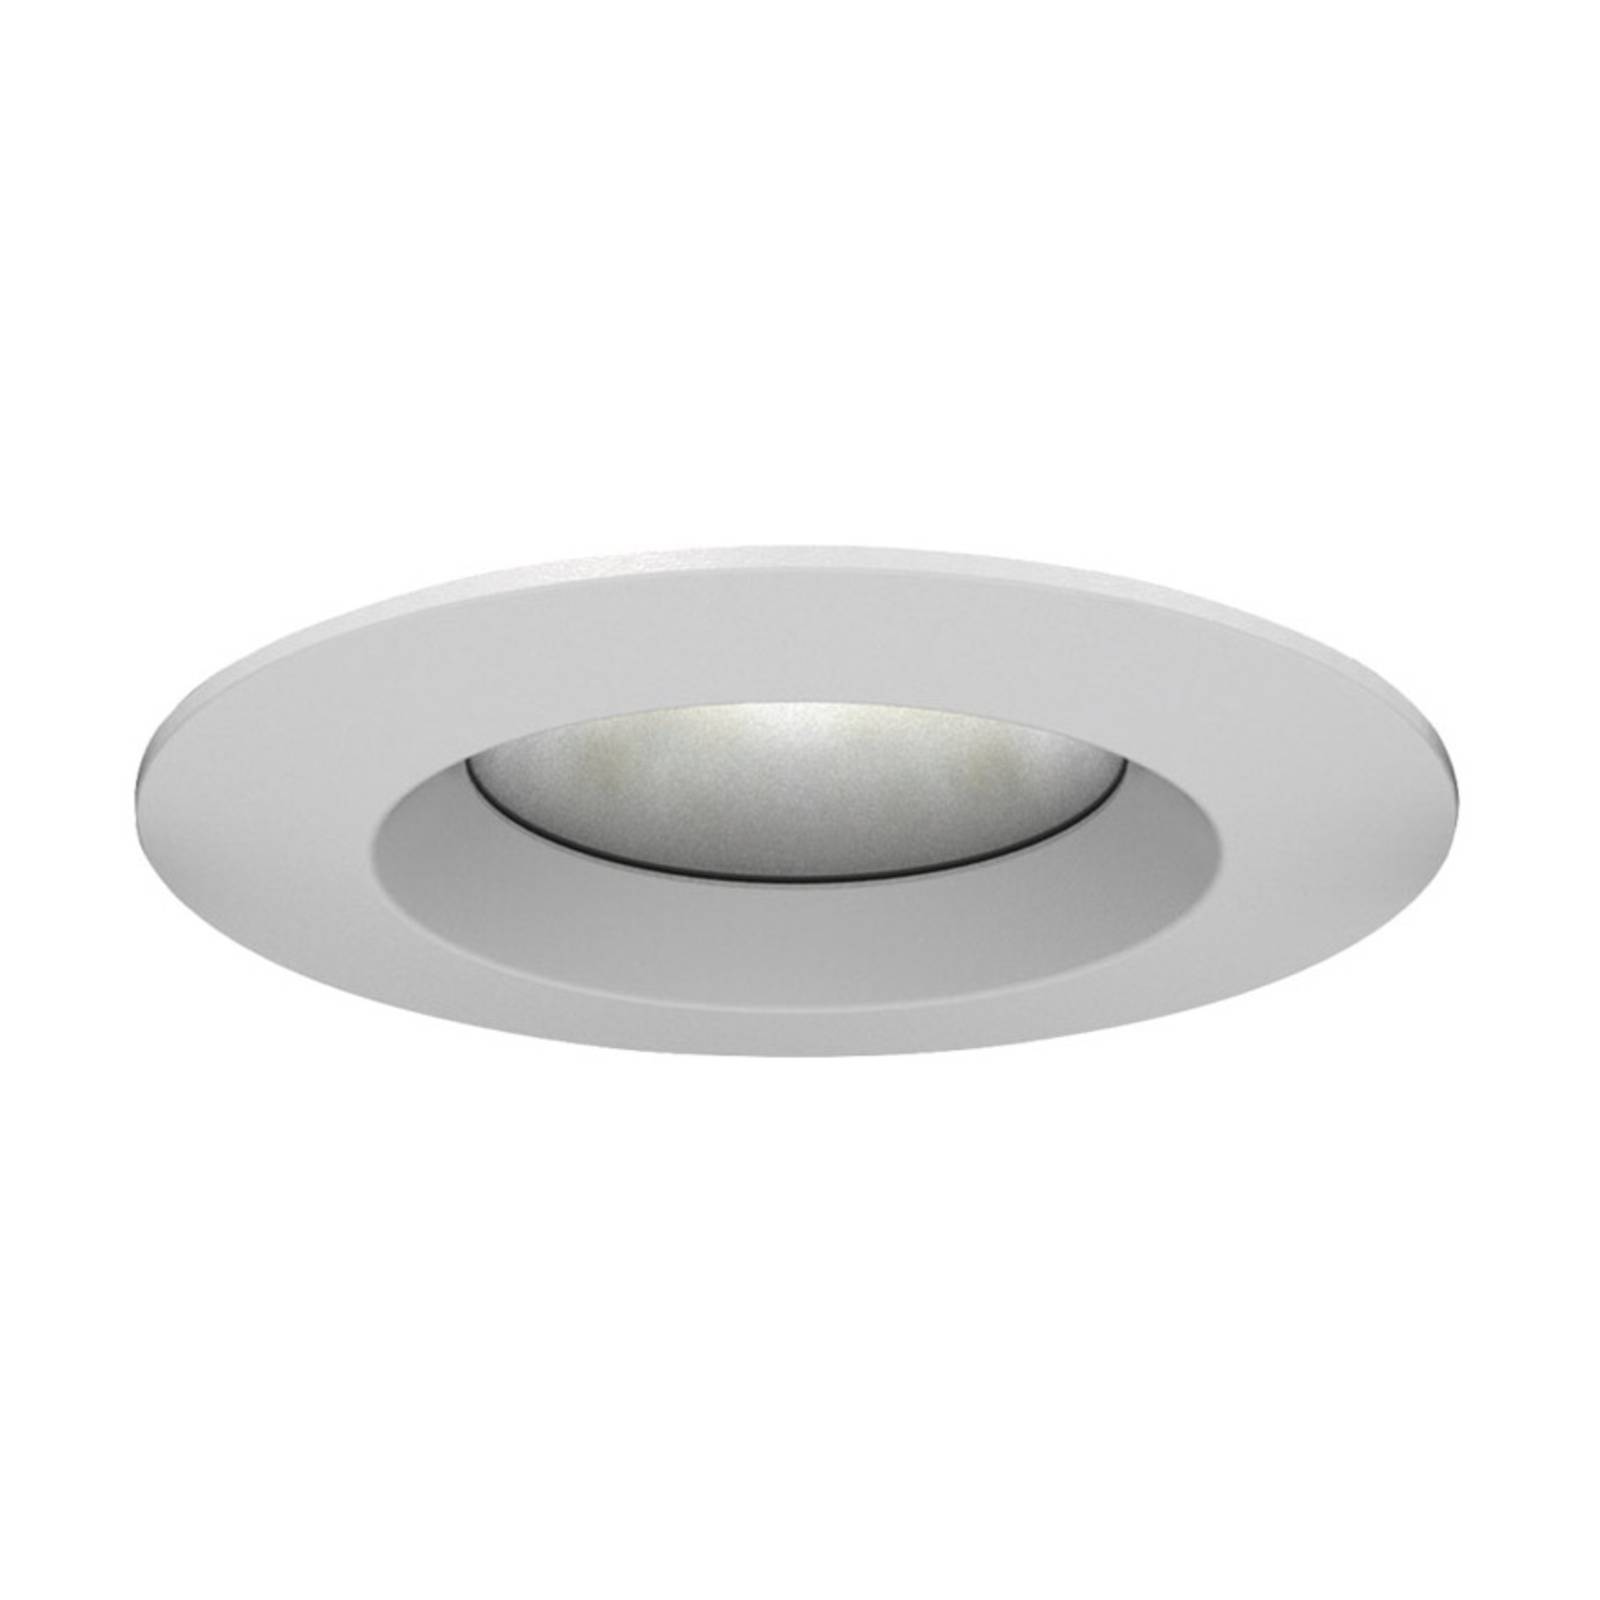 Image of Siteco Lunis 40 IP65 downlight LED dimmable Ø38 cm 4058352408452